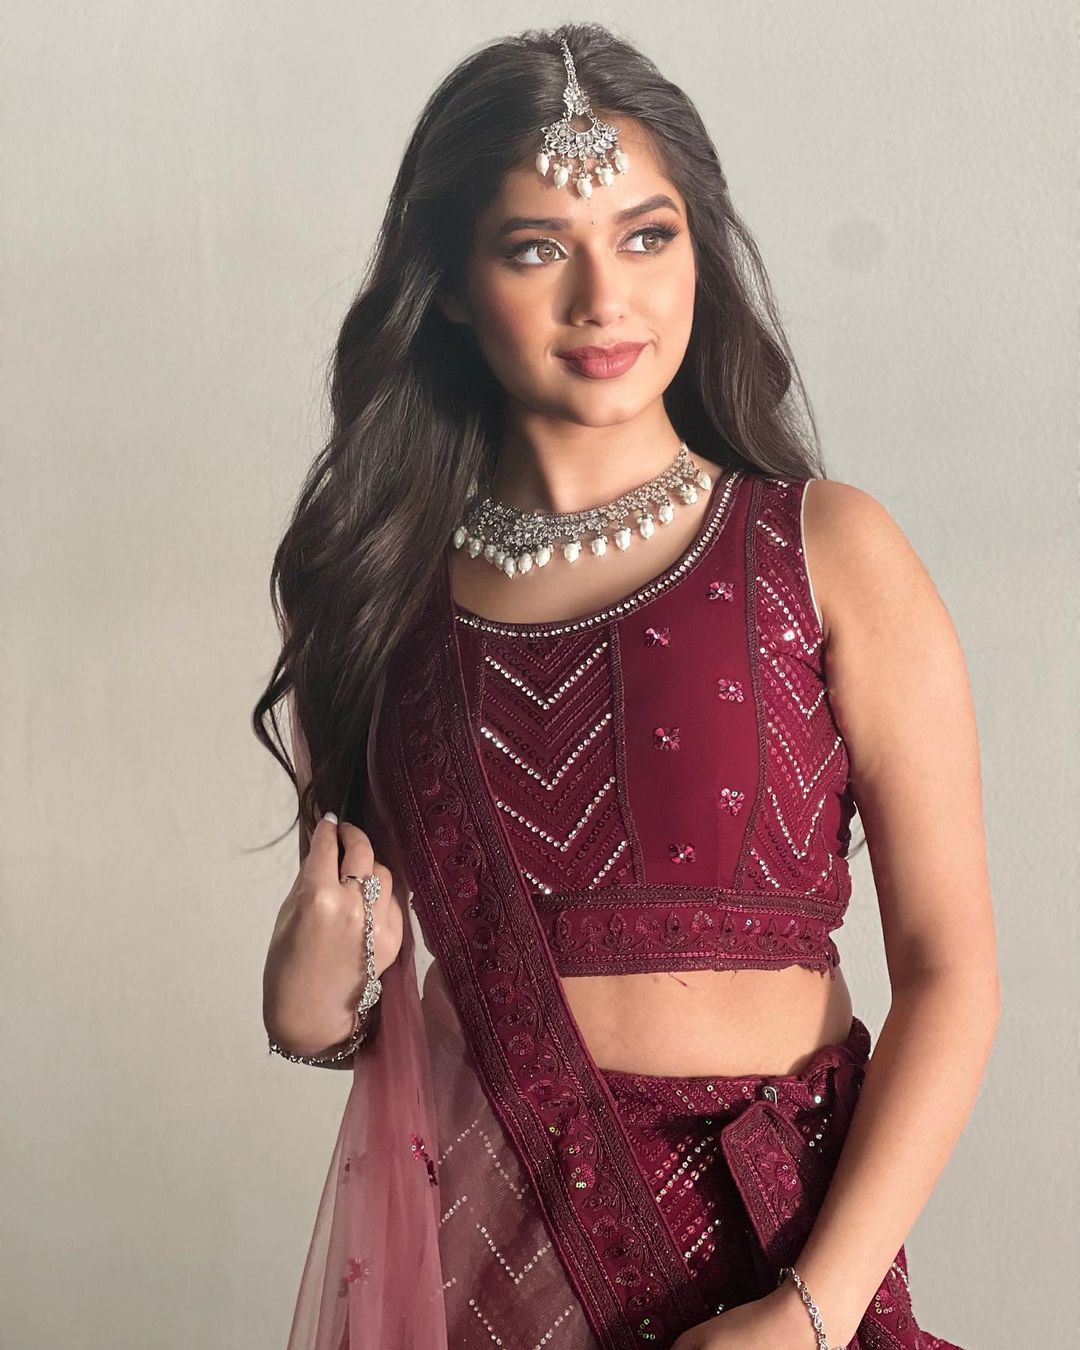 From Anushka Sen, Avneet Kaur to Jannat Zubair Rahmani: The traditional looks of these actresses rocked the hearts of fans 9594